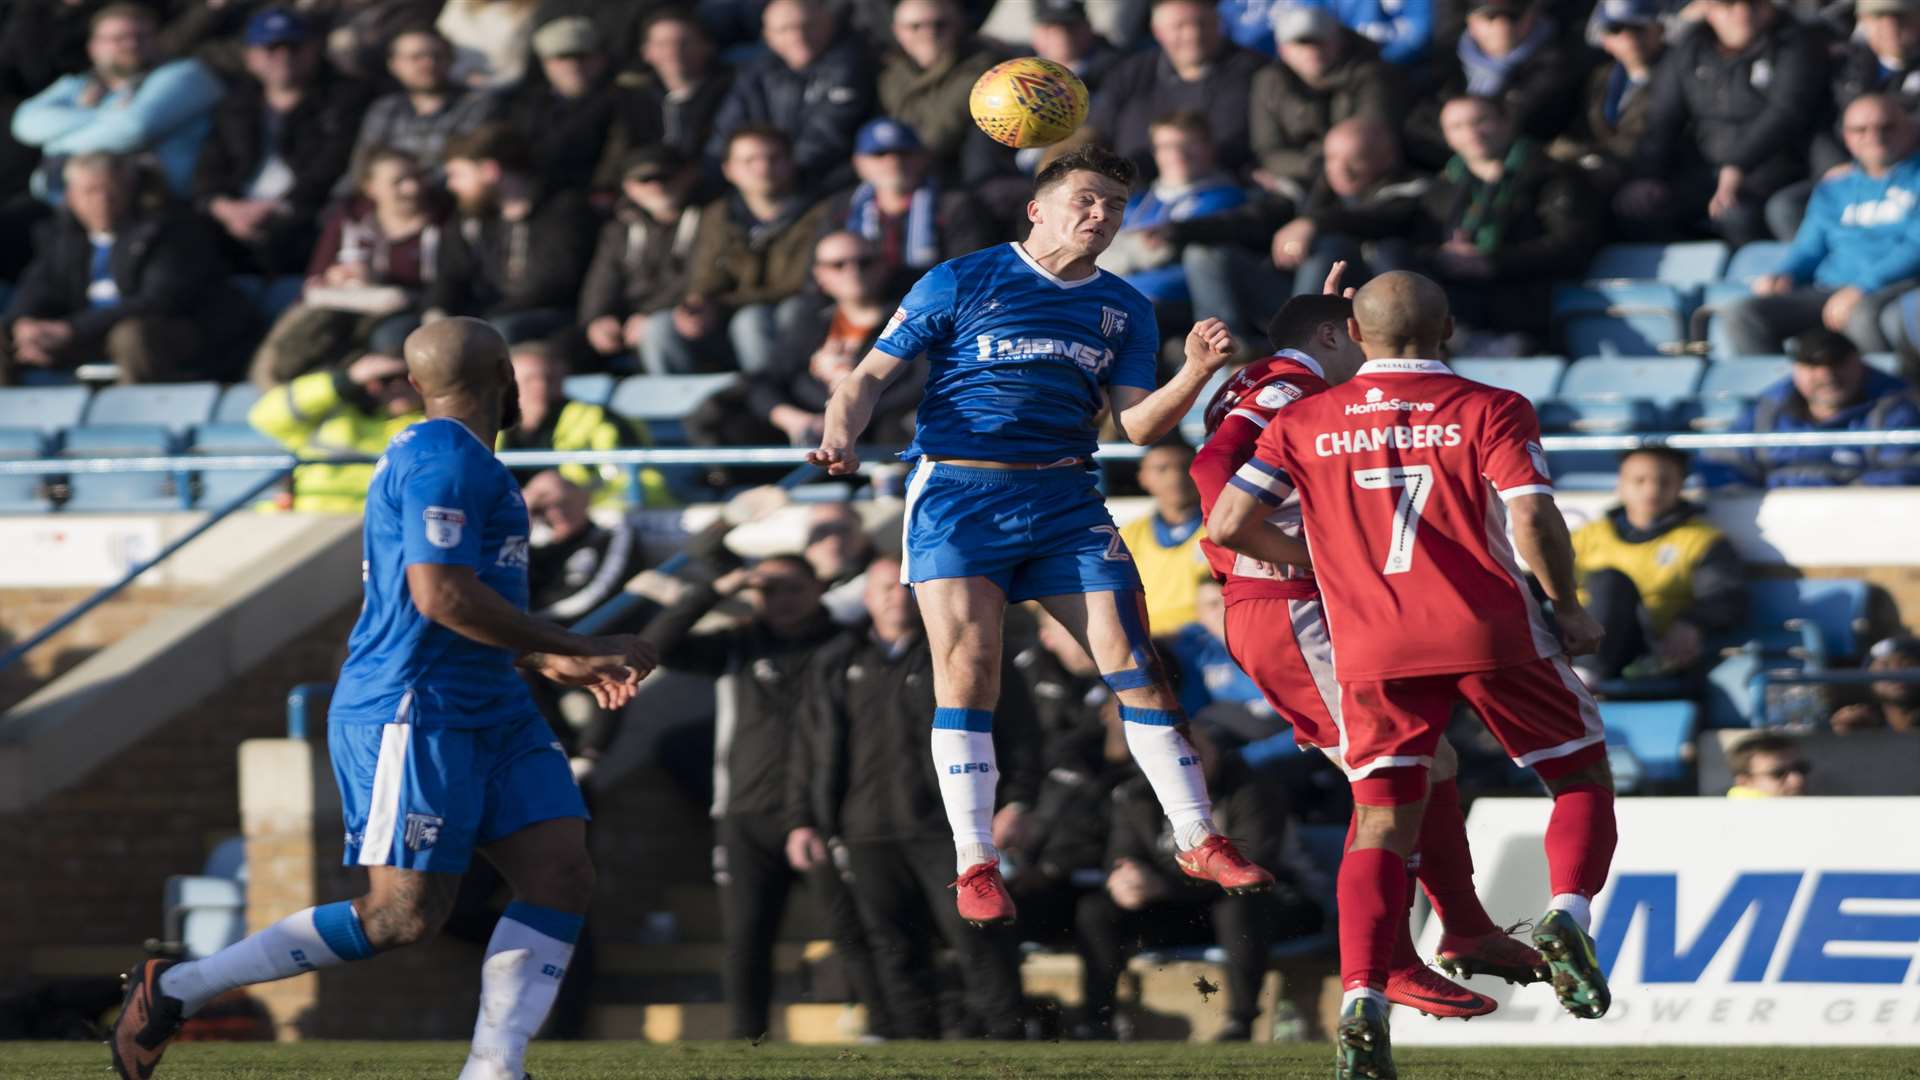 Callum Reilly wins a header for Gillingham Picture: Andy Payton